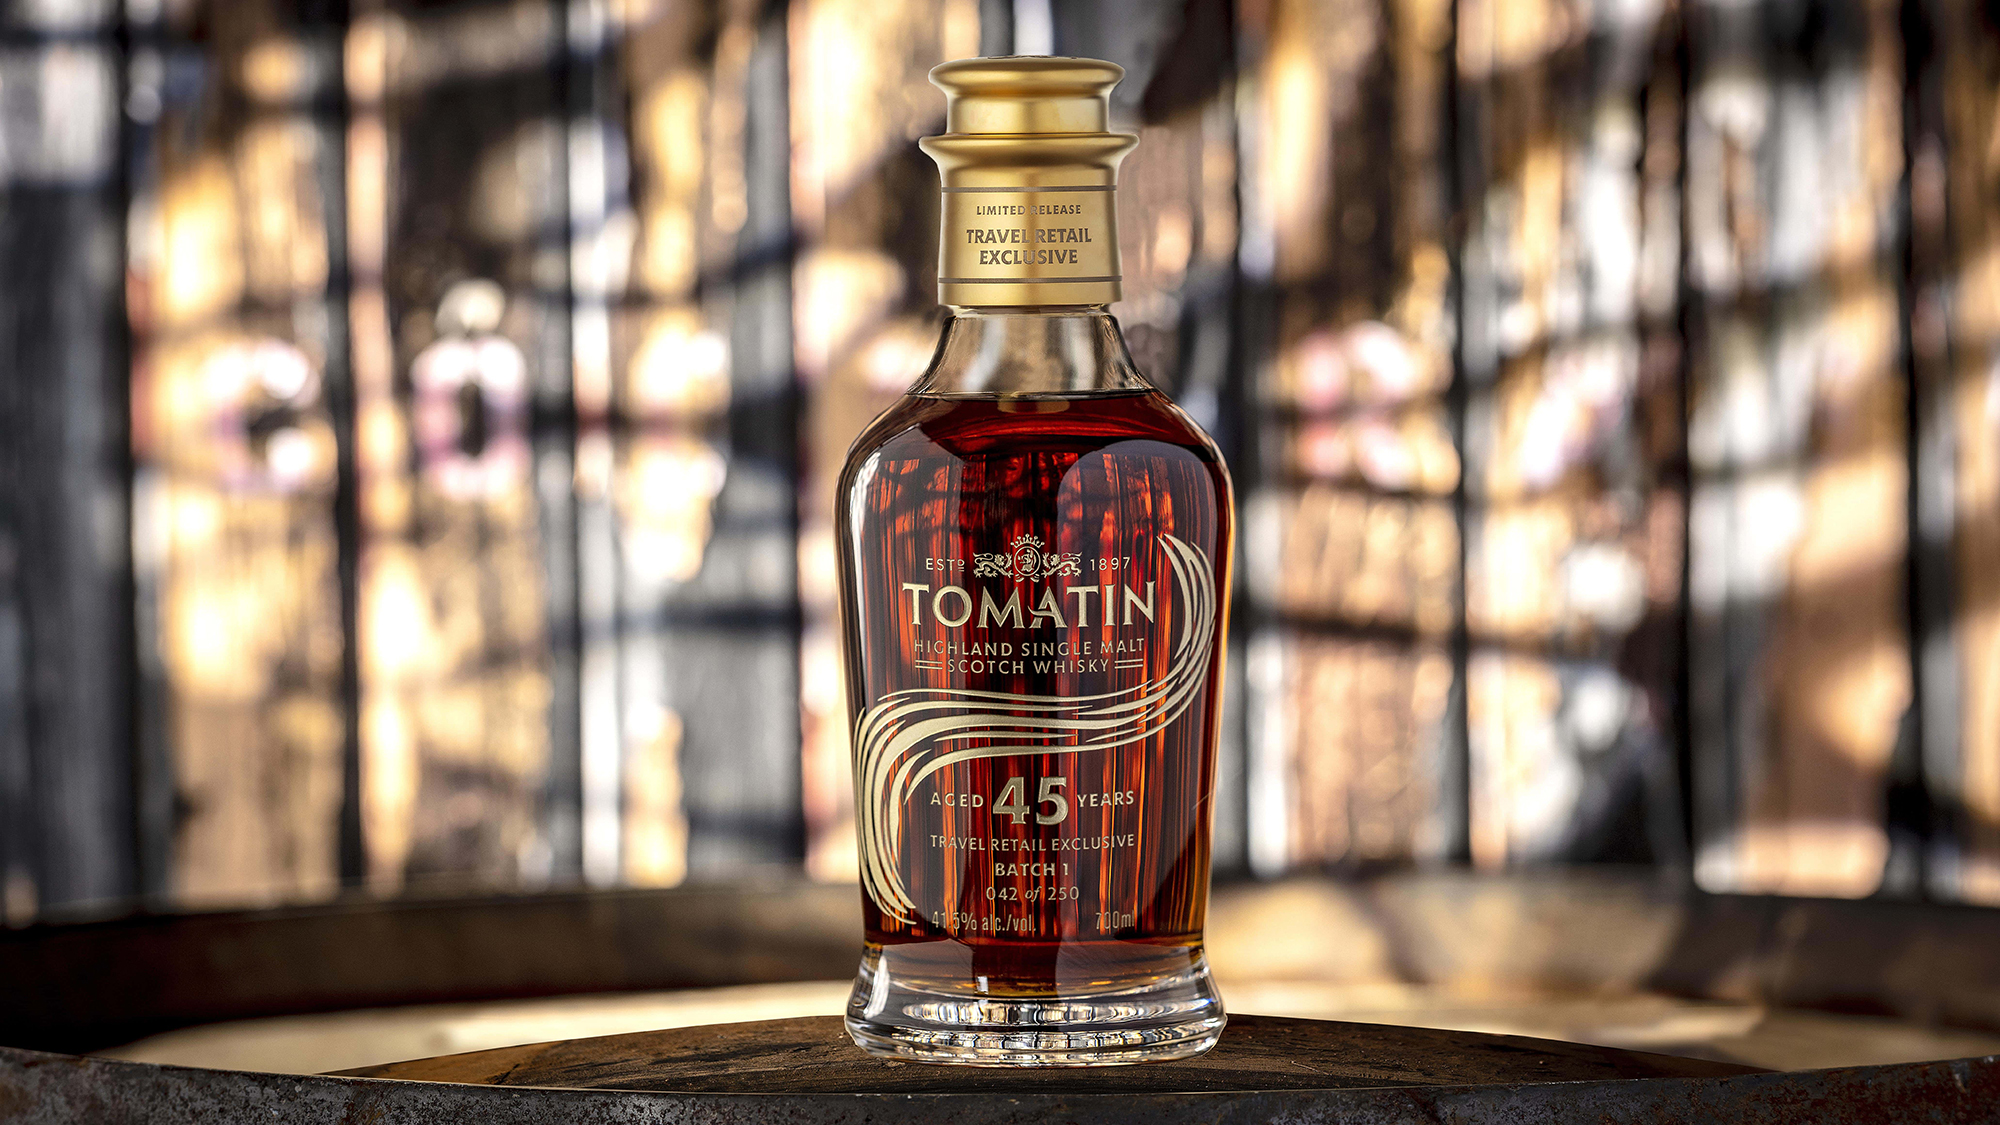 Tomatin Launches 45 Year Old Single Malt Exclusively In Travel Retail